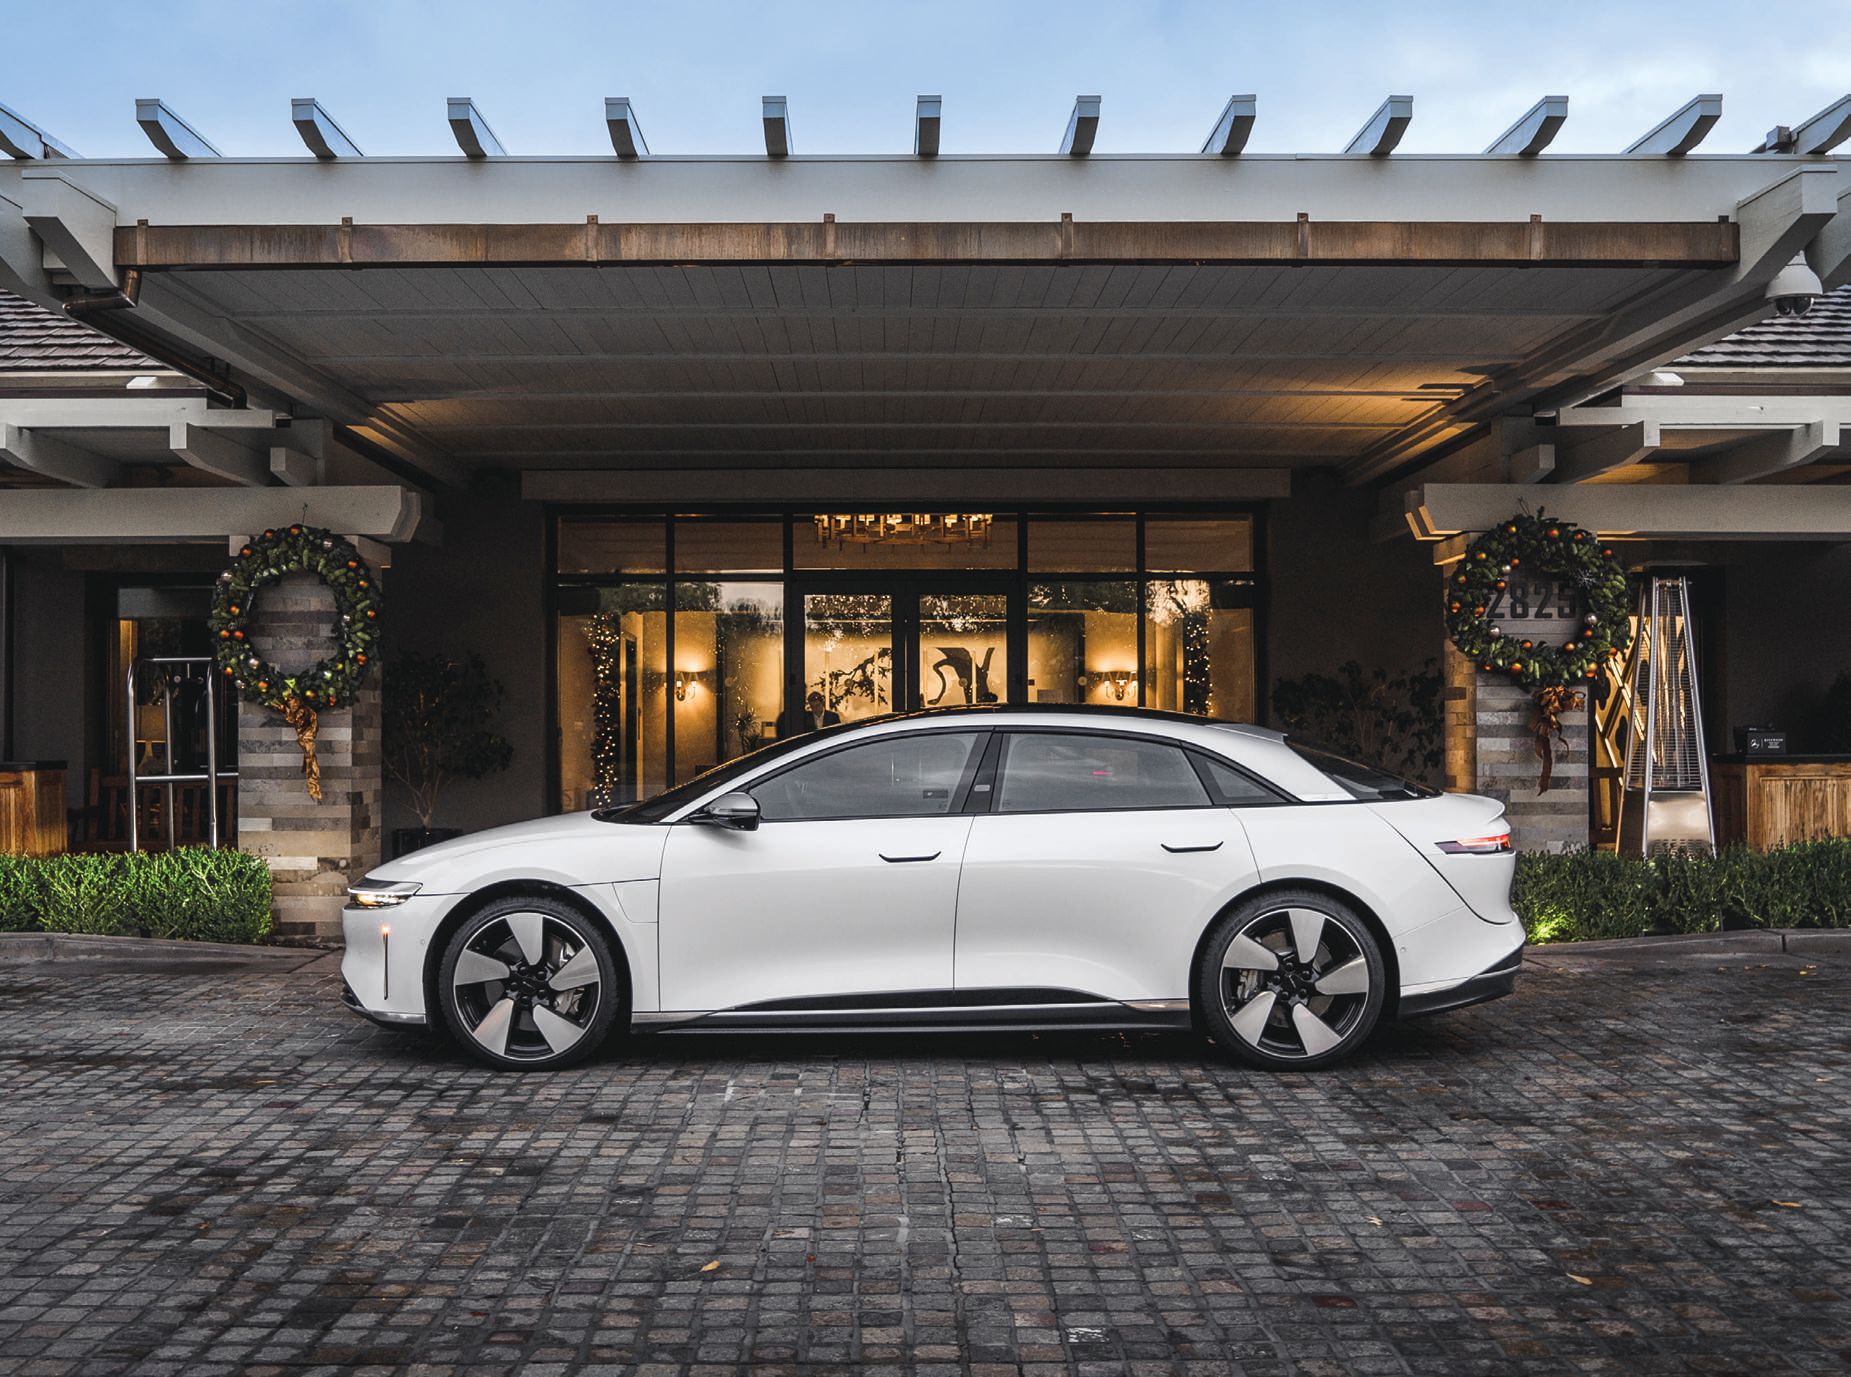 The Rosewood Sand Hill has another head-turning amenity for guests: the Lucid Air EV. PHOTO COURTESY OF BRAND